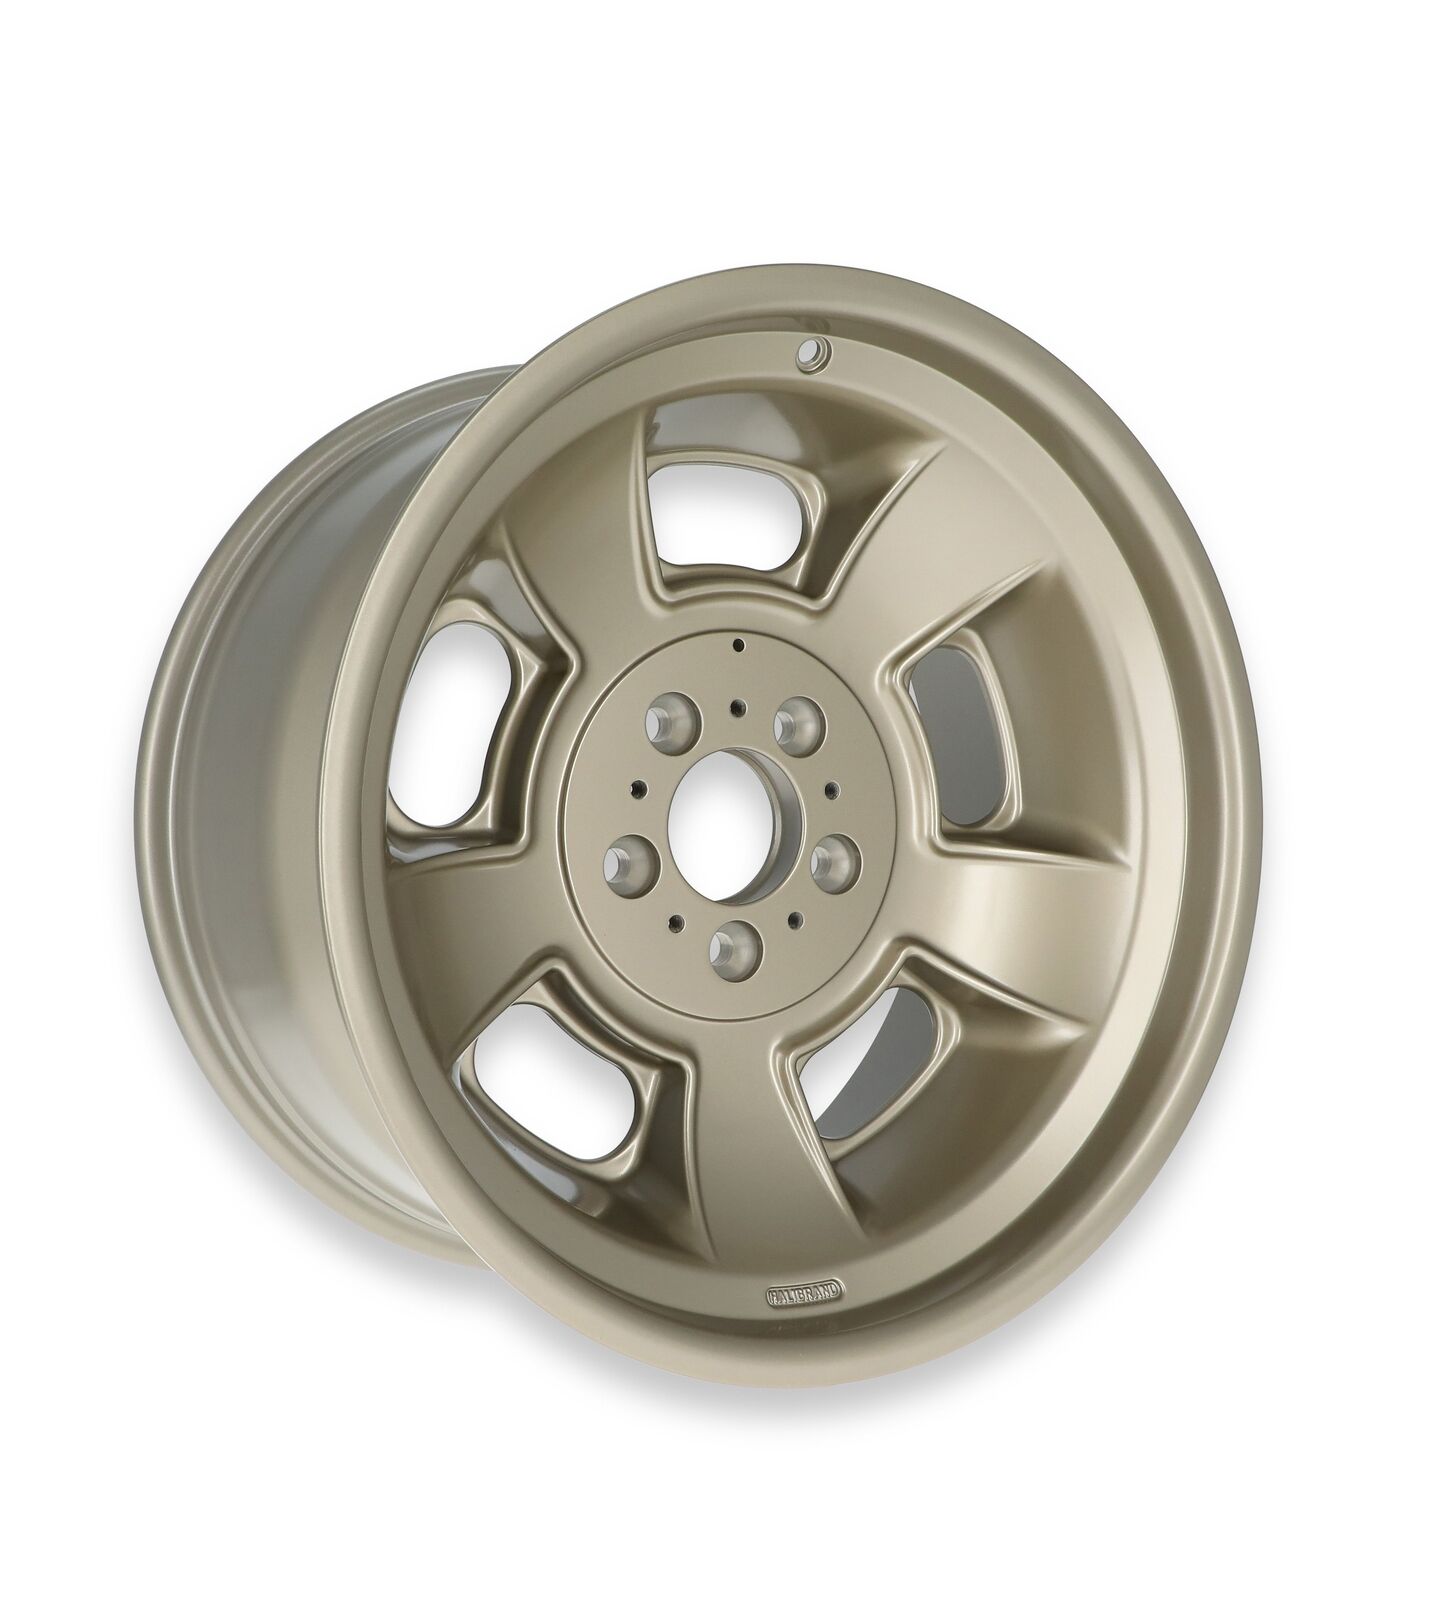 HB007-004 Halibrand Sprint with Spinner - 19x10 - 5x5 - 5.5 BS MAG7 Semi Gloss